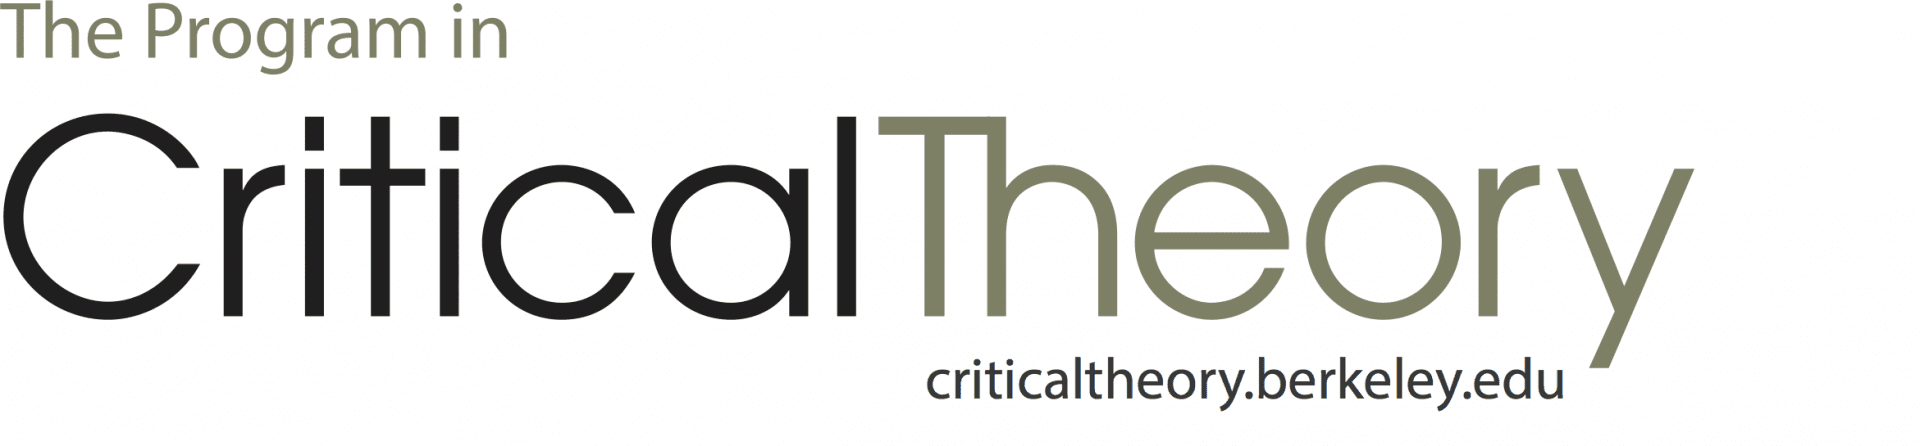 critical-theory-color-logotypemaster-withurl